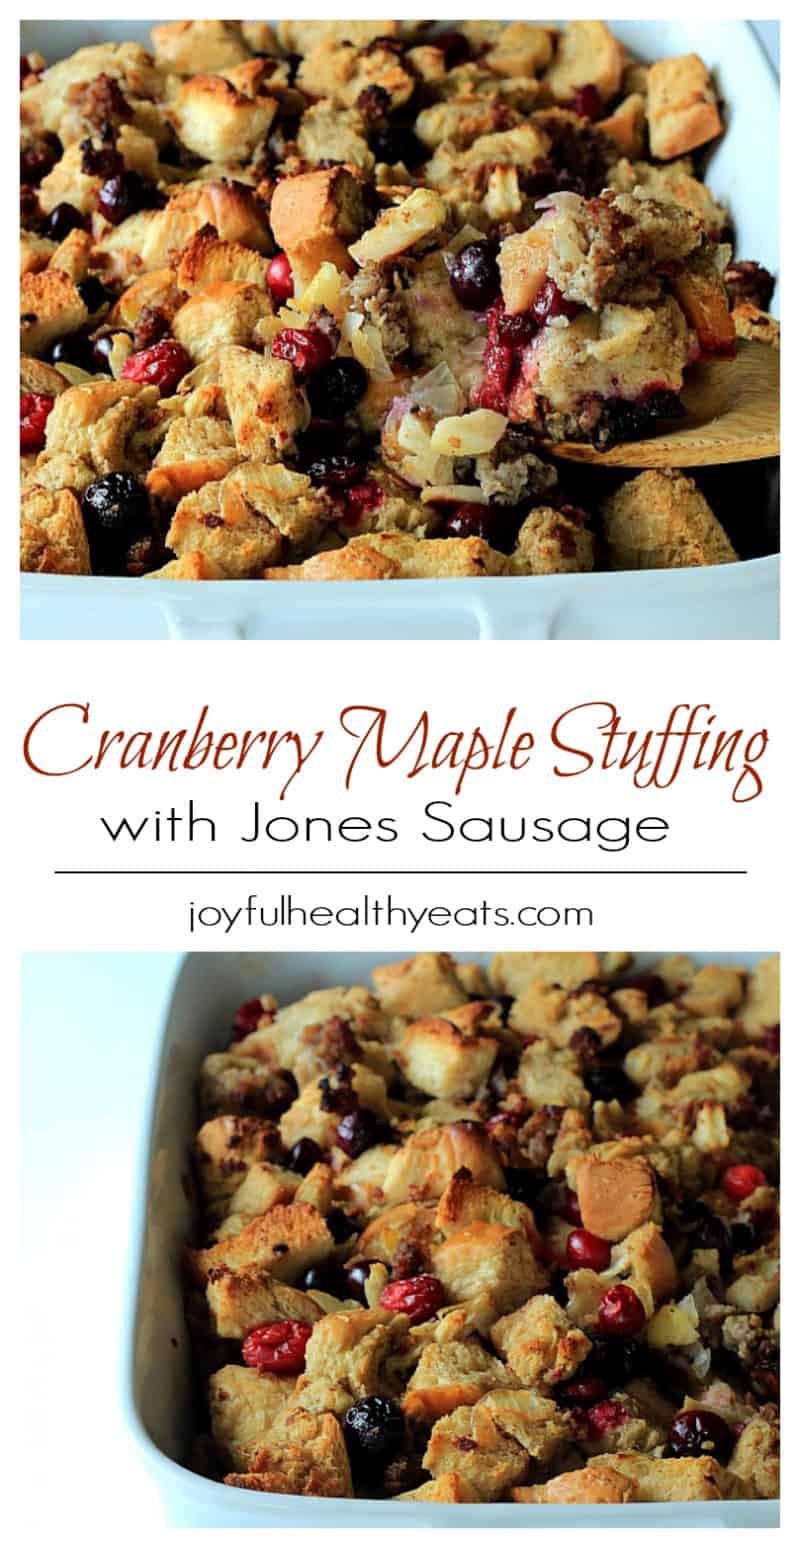 Collage for Cranberry Maple Stuffing with Jones Sausage recipe